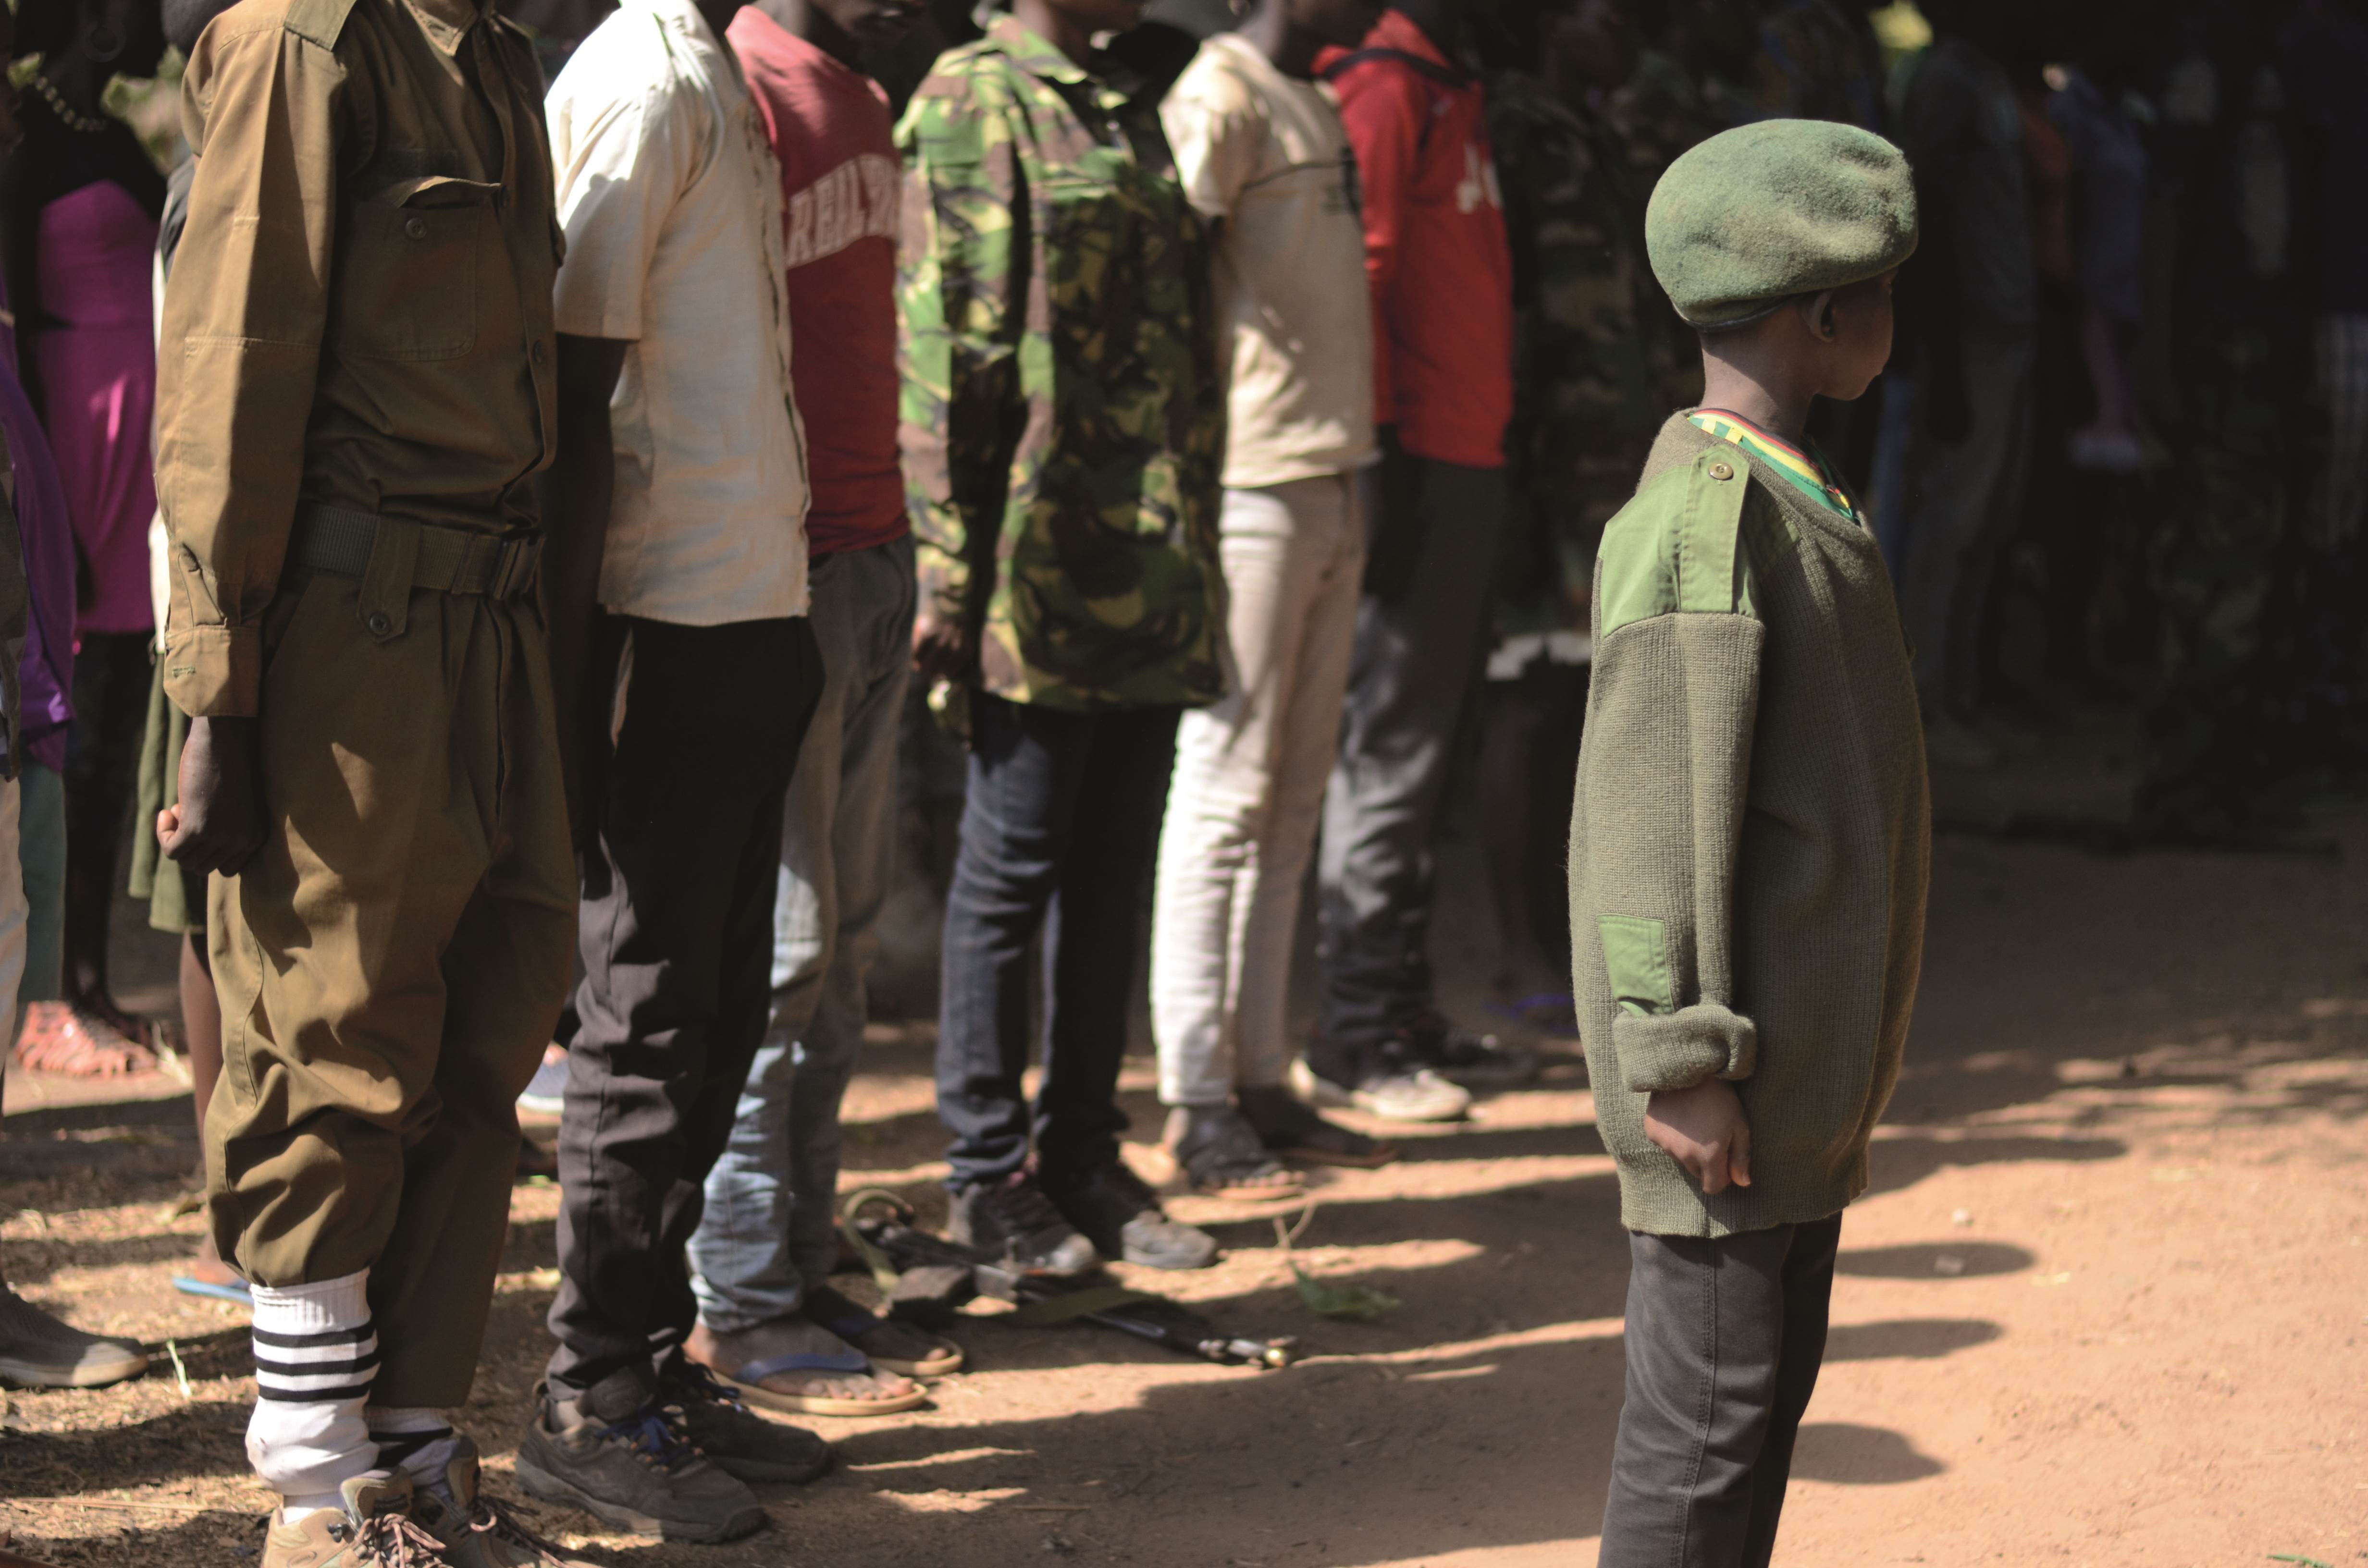 People stand in line behind a child wearing army camouflage and a beret in South Sudan